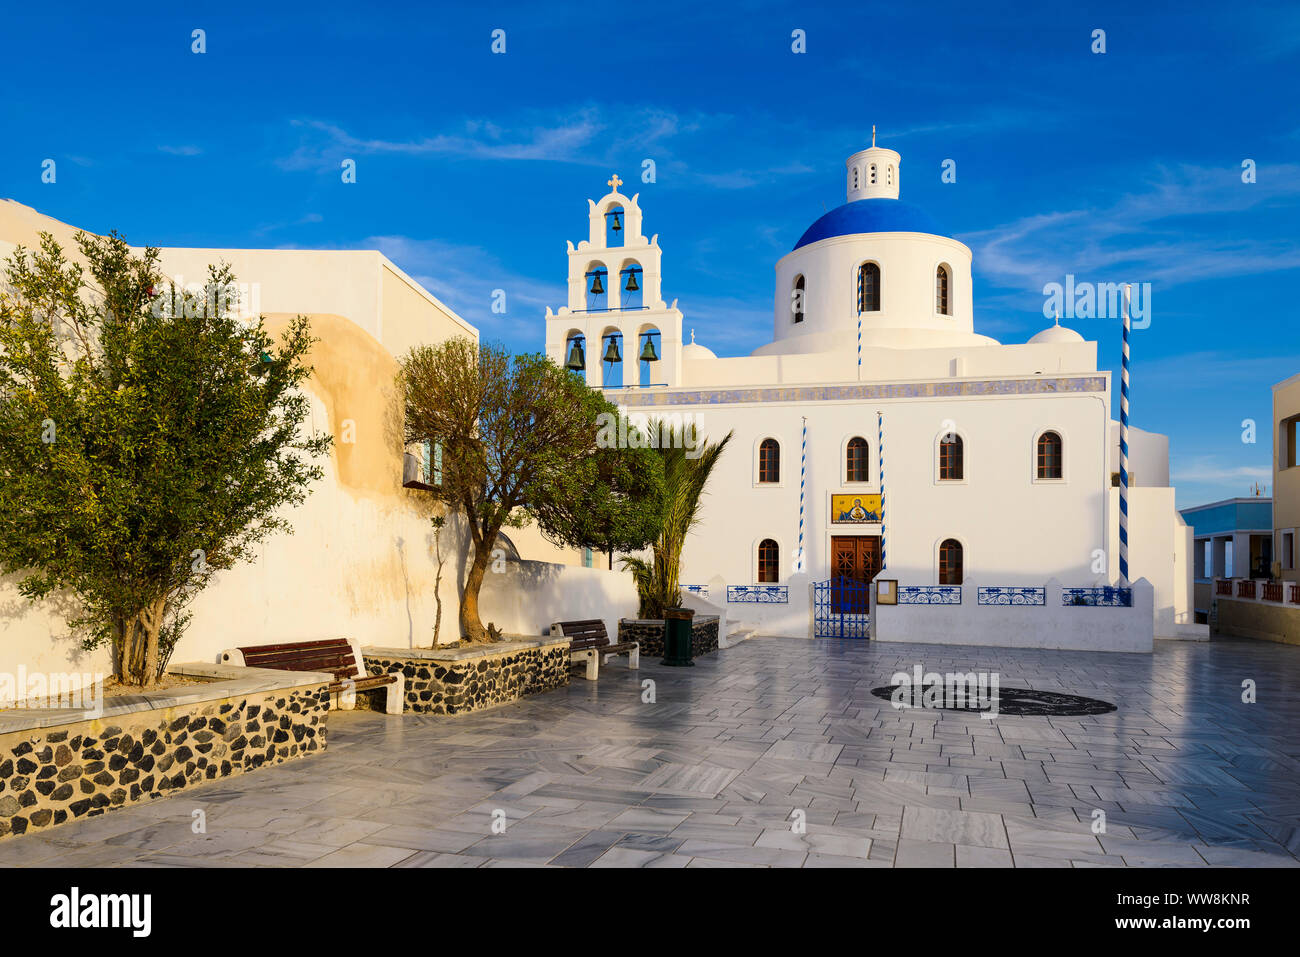 Traditional white church with a blue dome on Santorini island, Greece Stock Photo